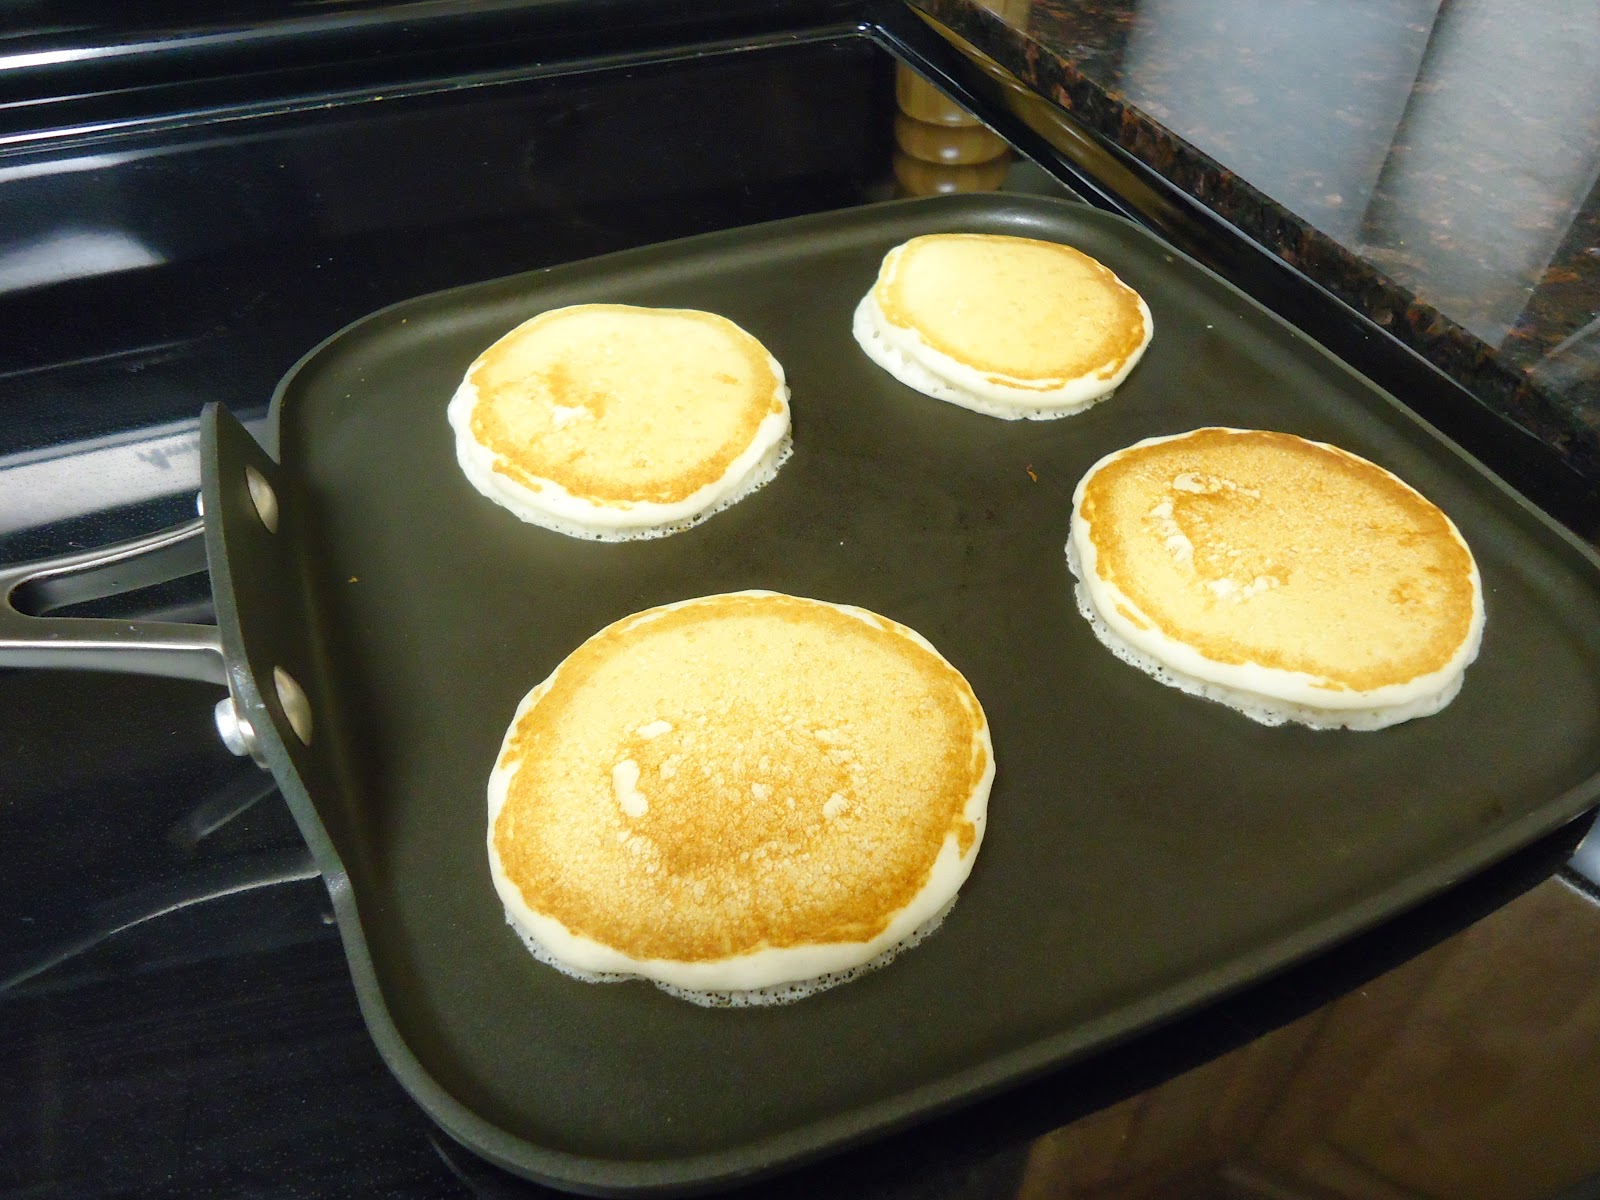 muffin how pancakes Cooking: to make with Allergy Egg mix {Egg Pancakes free}